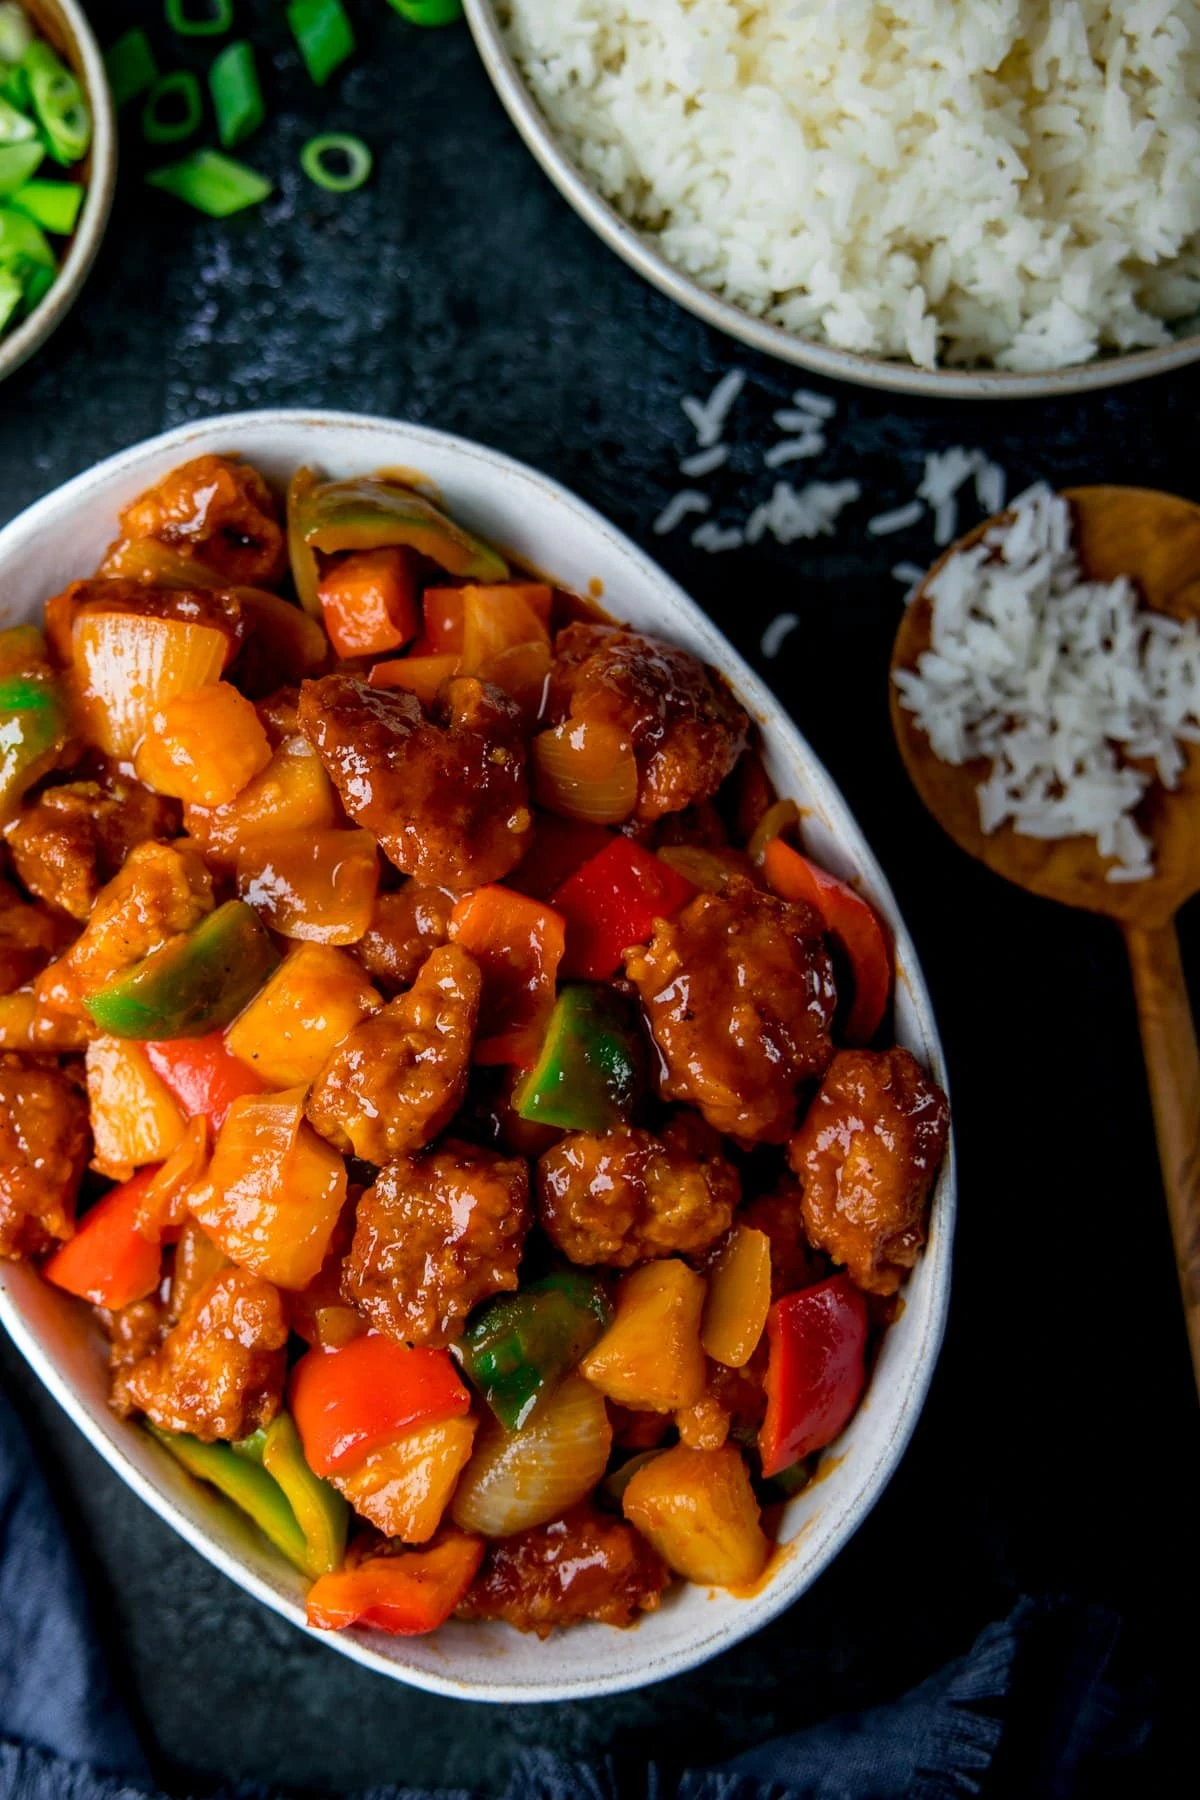 White oval bowl filled with sweet and sour pork. Rice and spring onions also on the table.